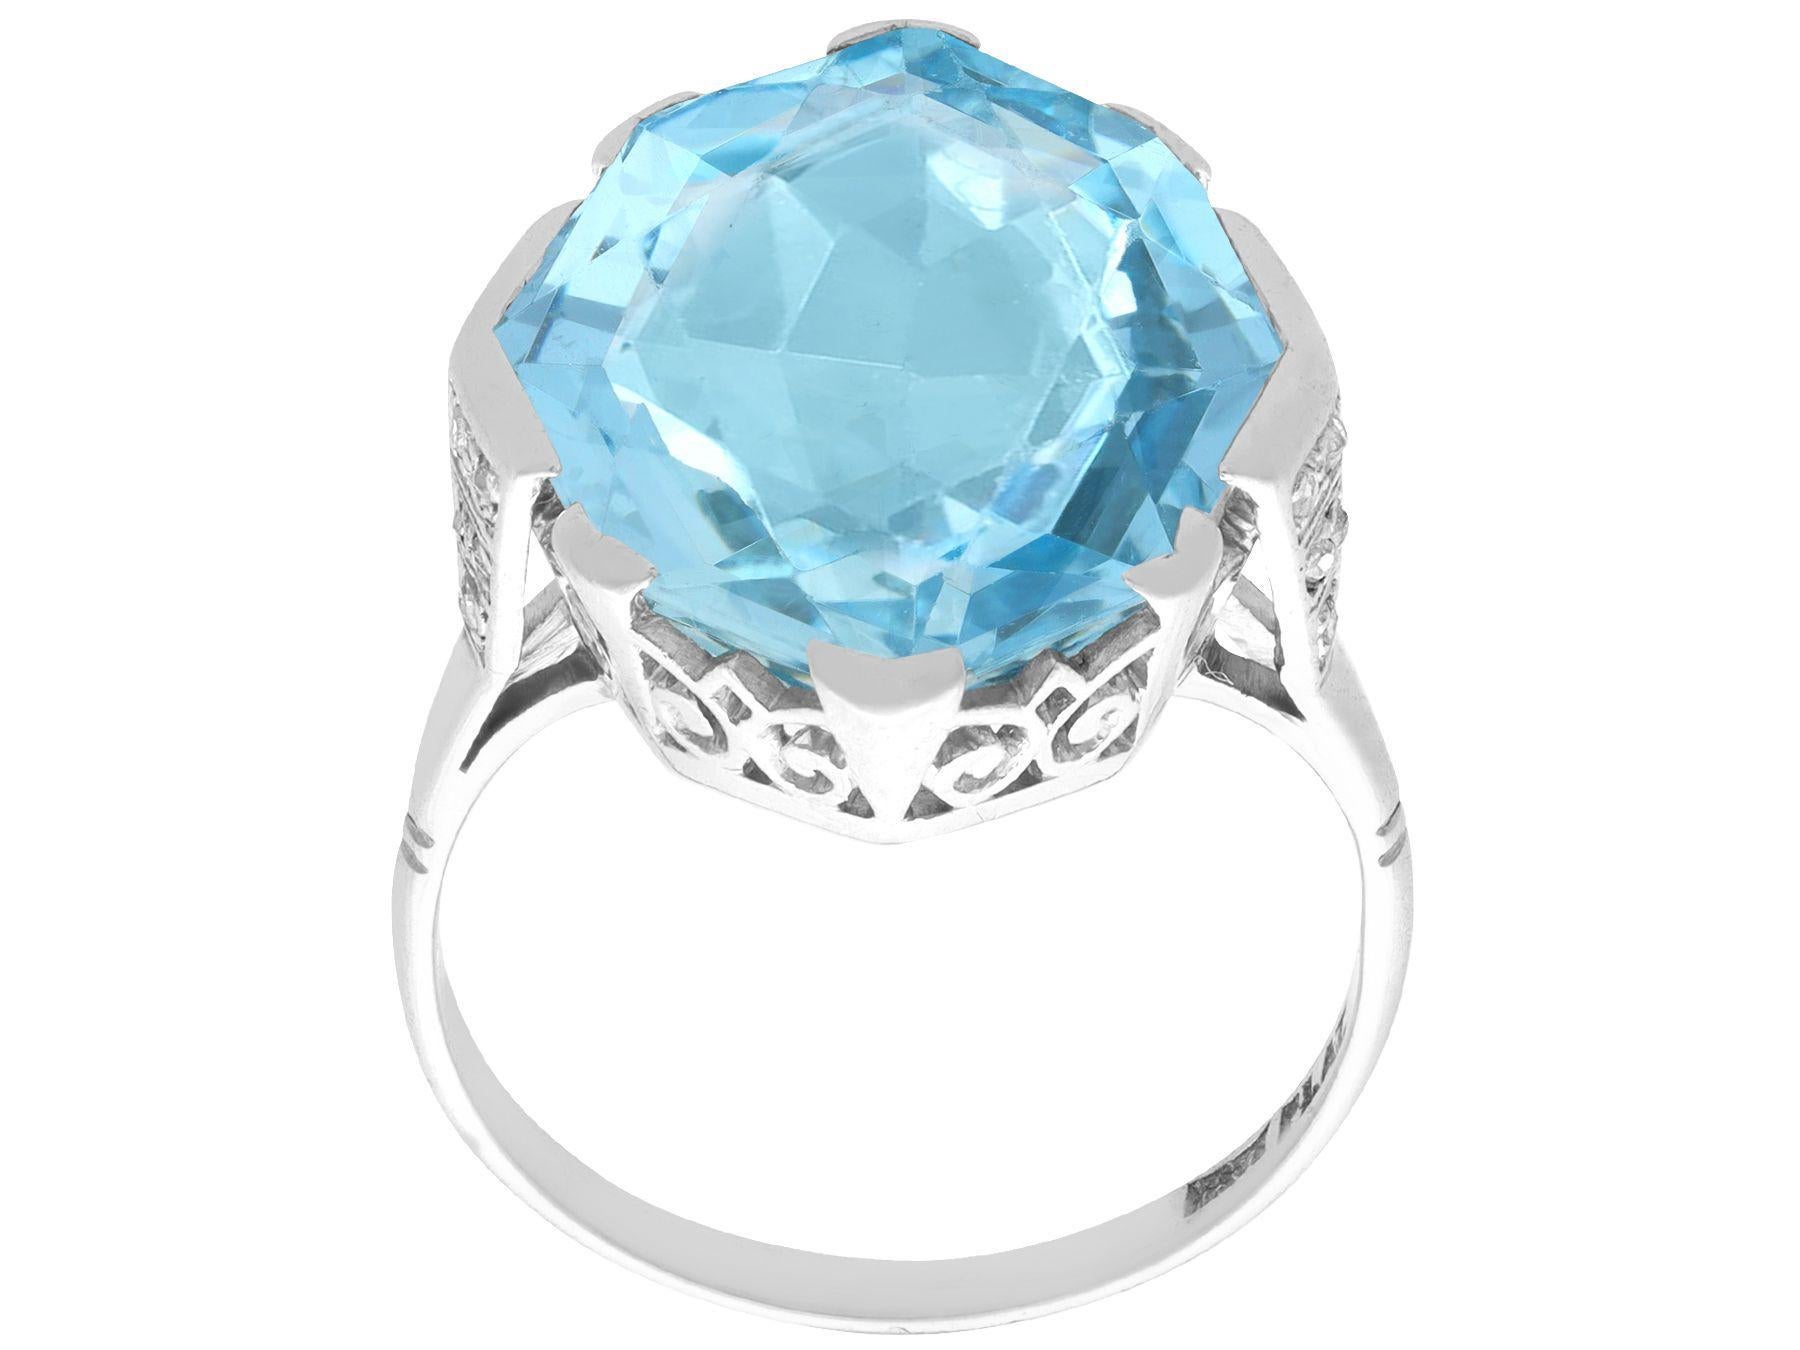 Women's or Men's Vintage 14.35ct Aquamarine and Diamond and White Gold Cocktail Ring, circa 1950 For Sale